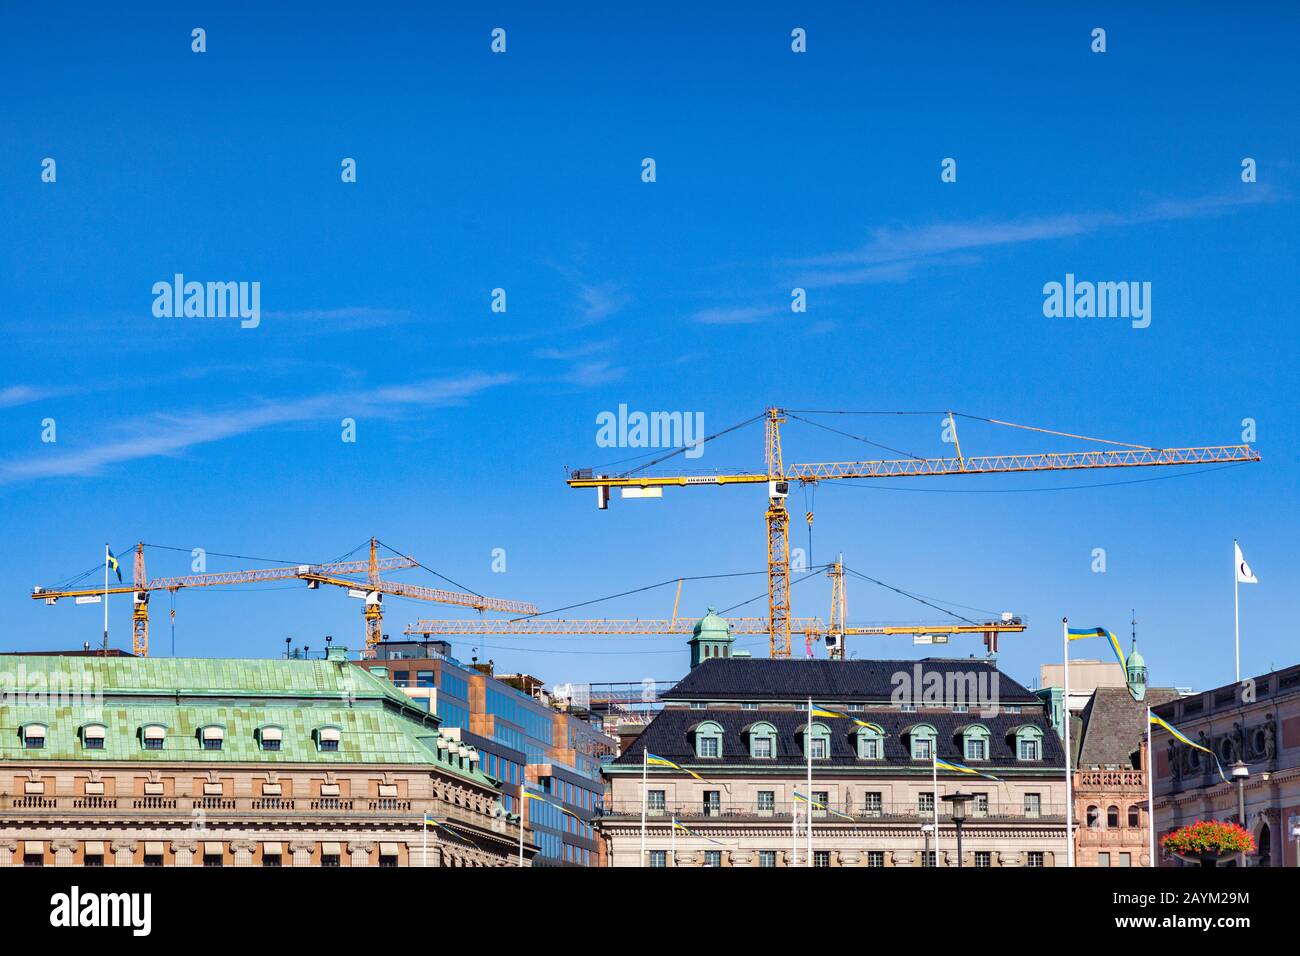 16 September 2018: Stockholm, Sweden - Cranes working above the historic rooftops of the old city. Stock Photo